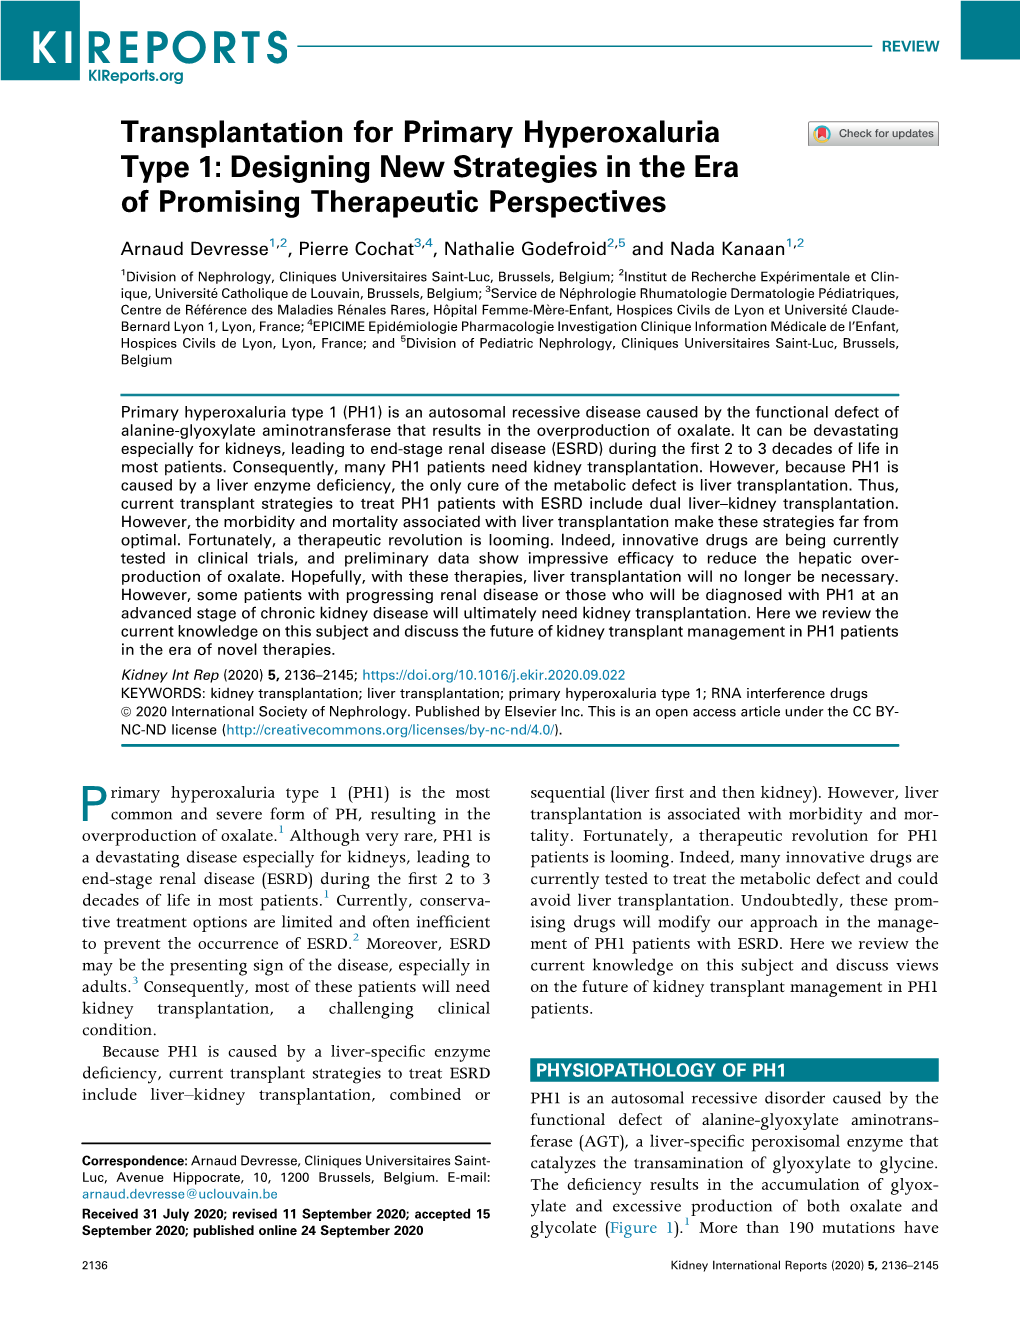 Transplantation for Primary Hyperoxaluria Type 1: Designing New Strategies in the Era of Promising Therapeutic Perspectives